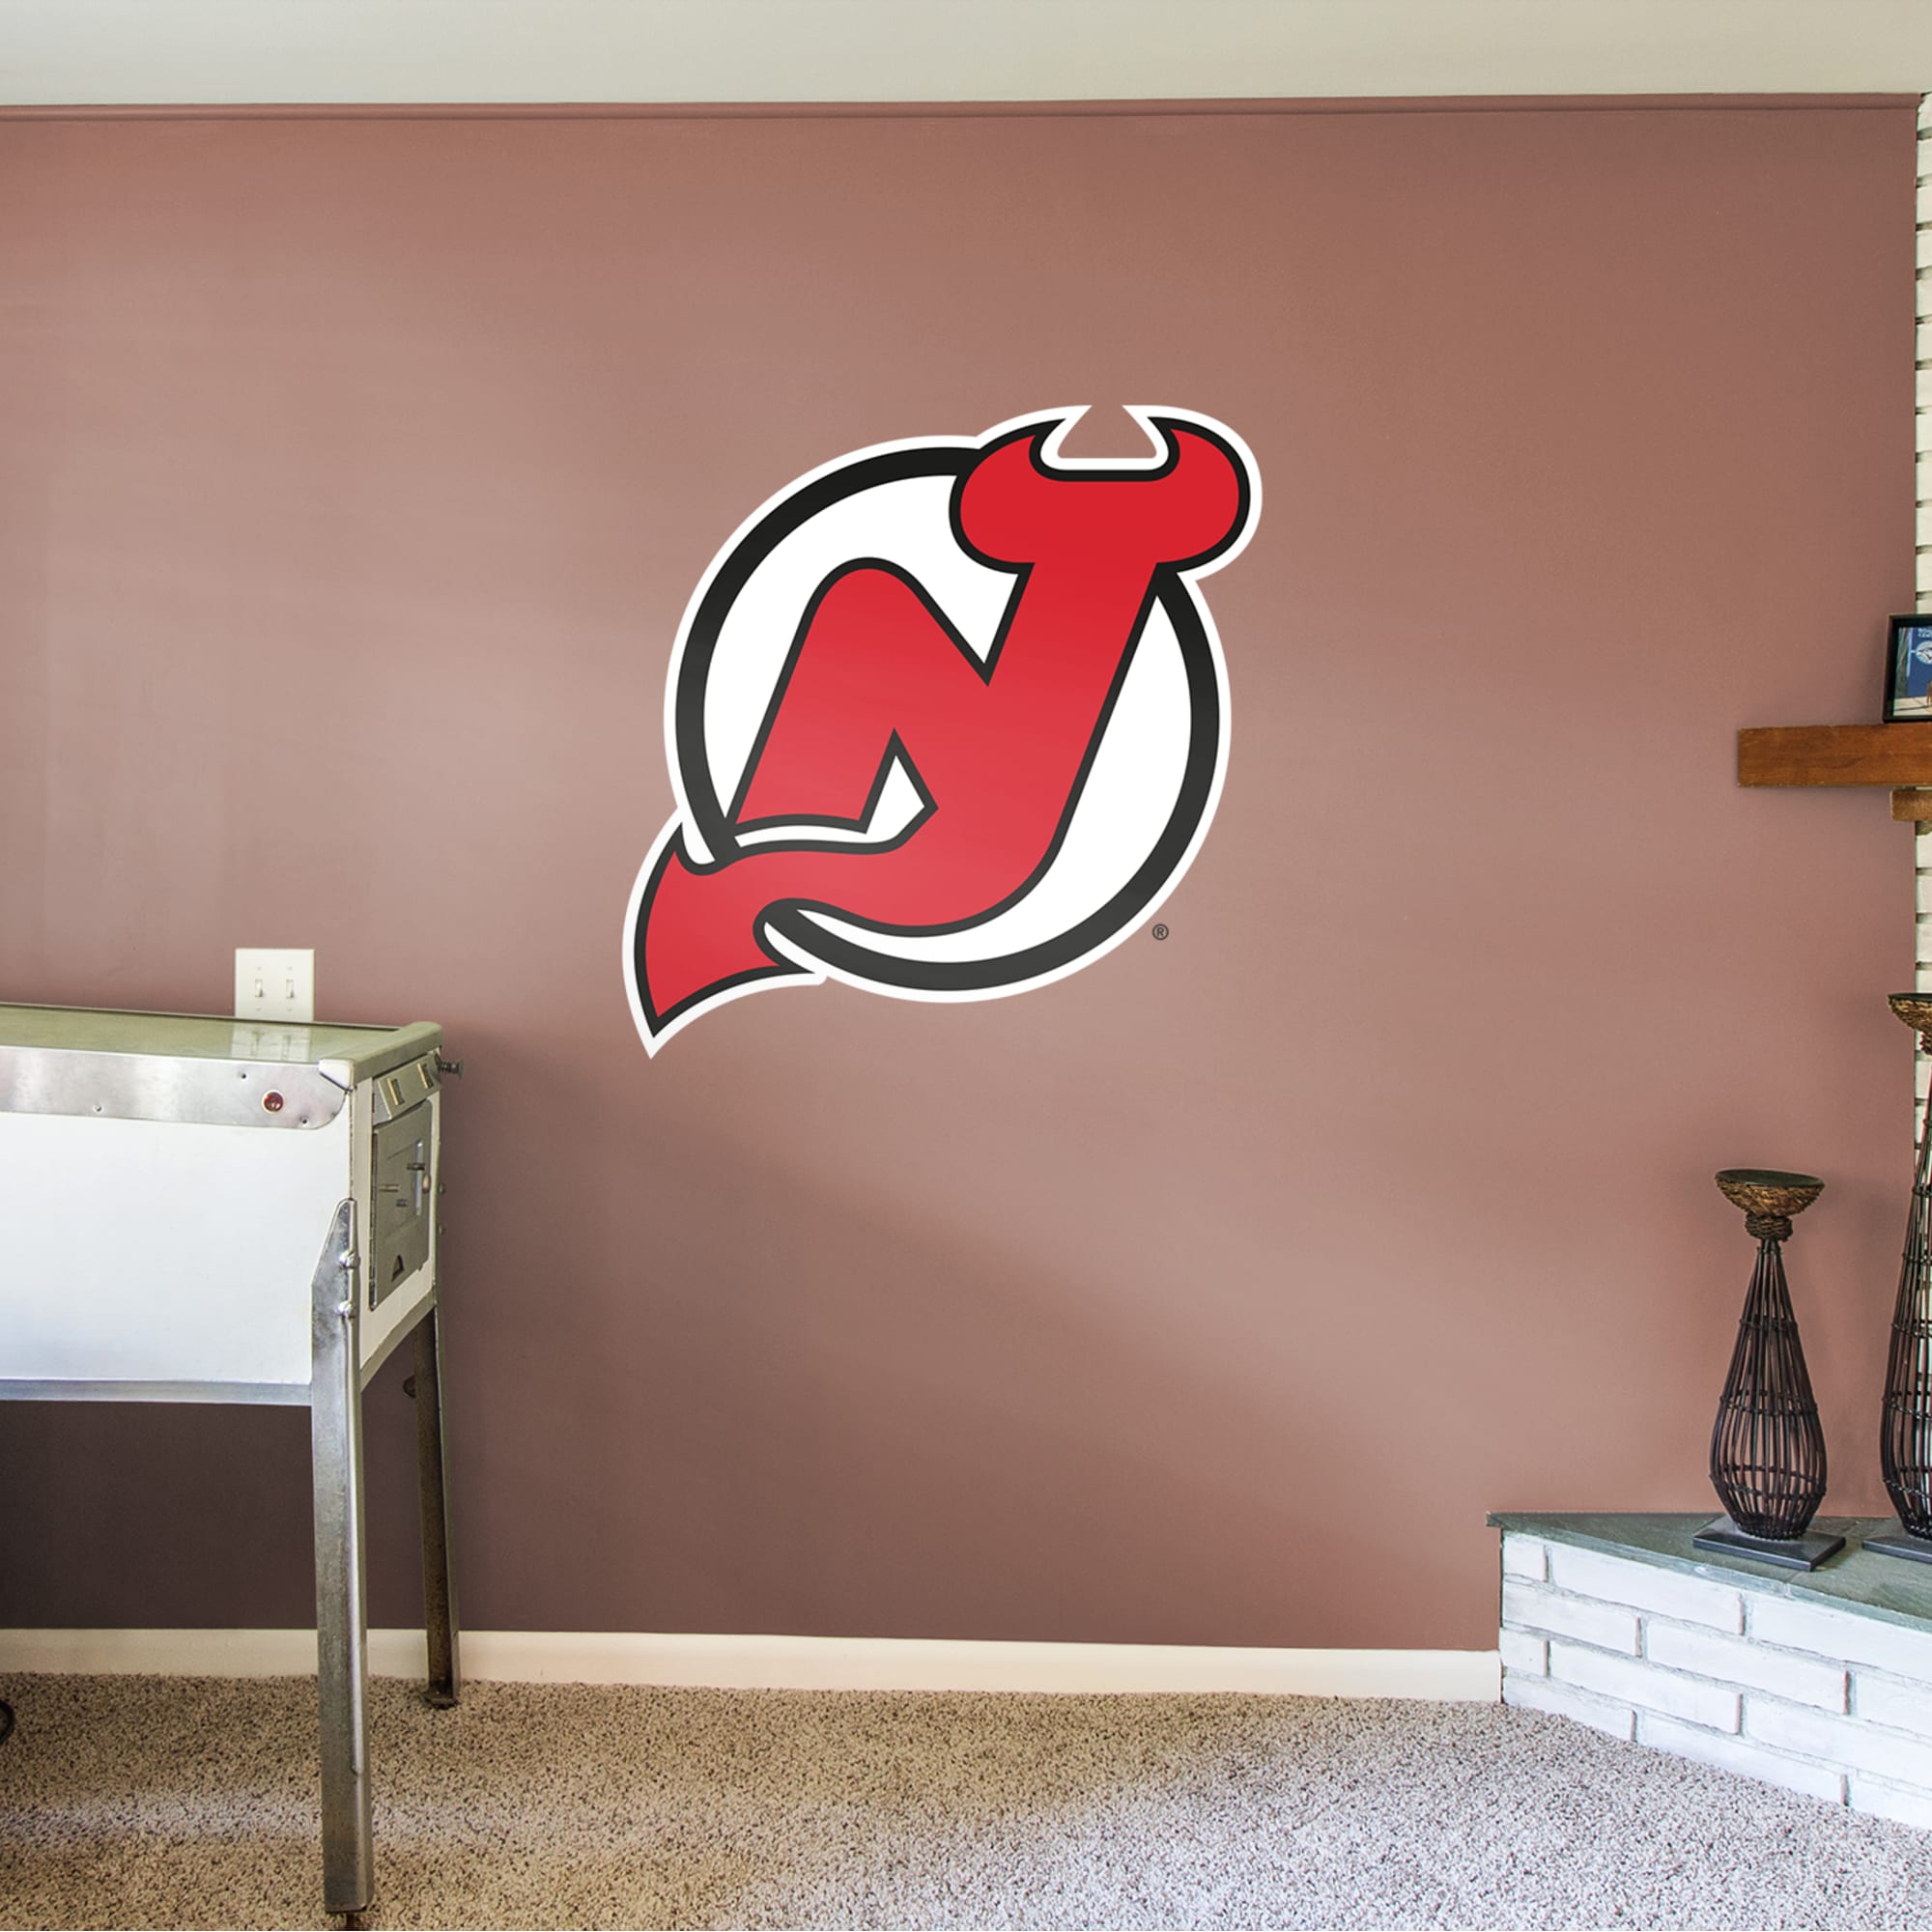 New Jersey Devils: Logo - Officially Licensed NHL Removable Wall Decal Giant Logo (40"W x 40"H) by Fathead | Vinyl